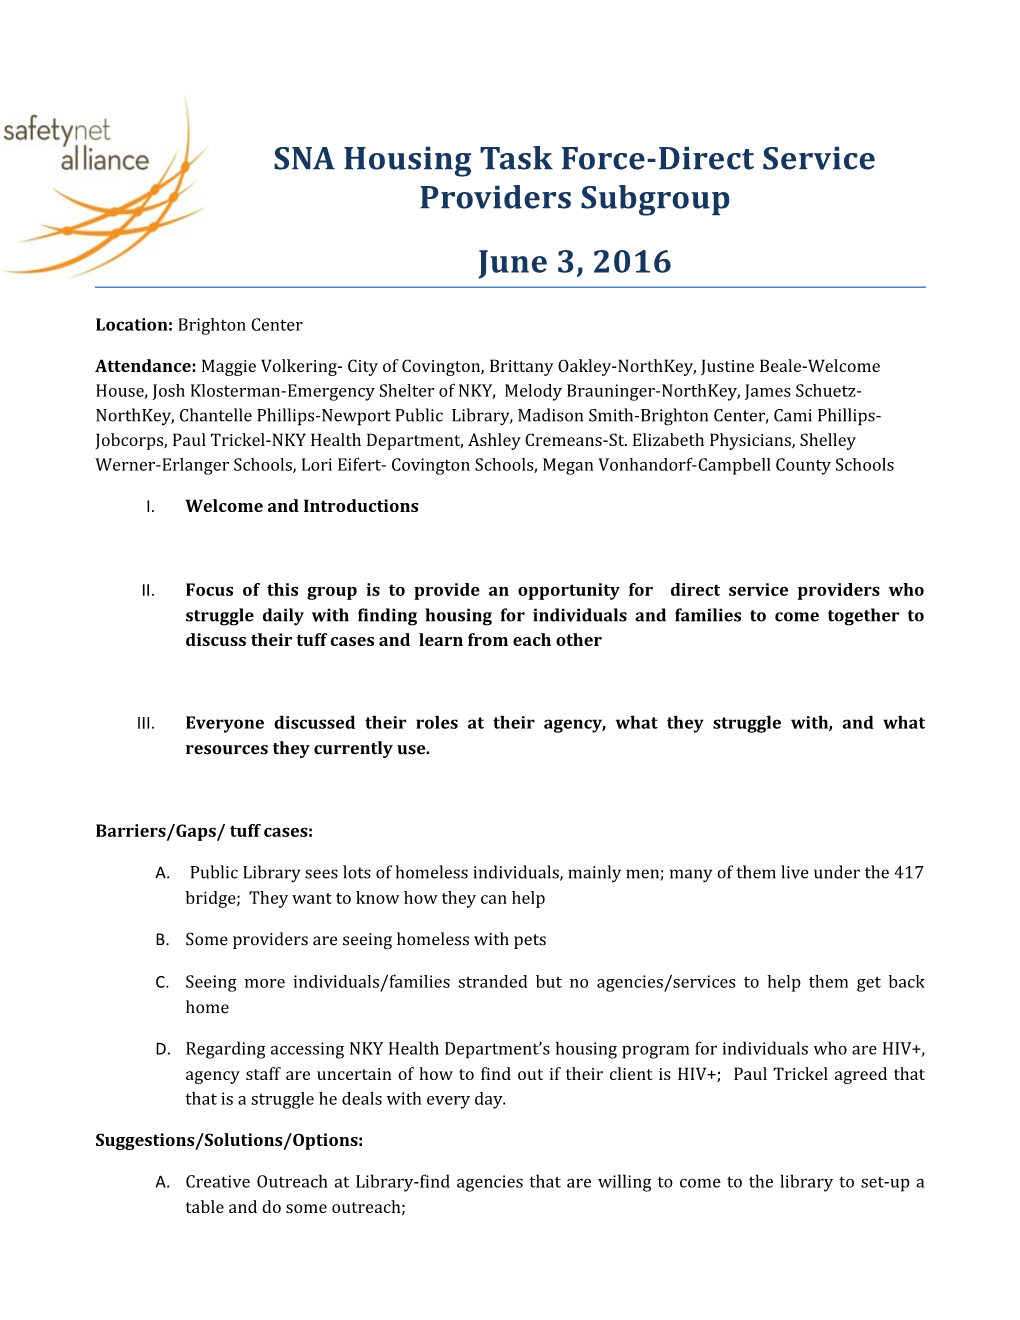 SNA Housing Task Force-Direct Service Providers Subgroup